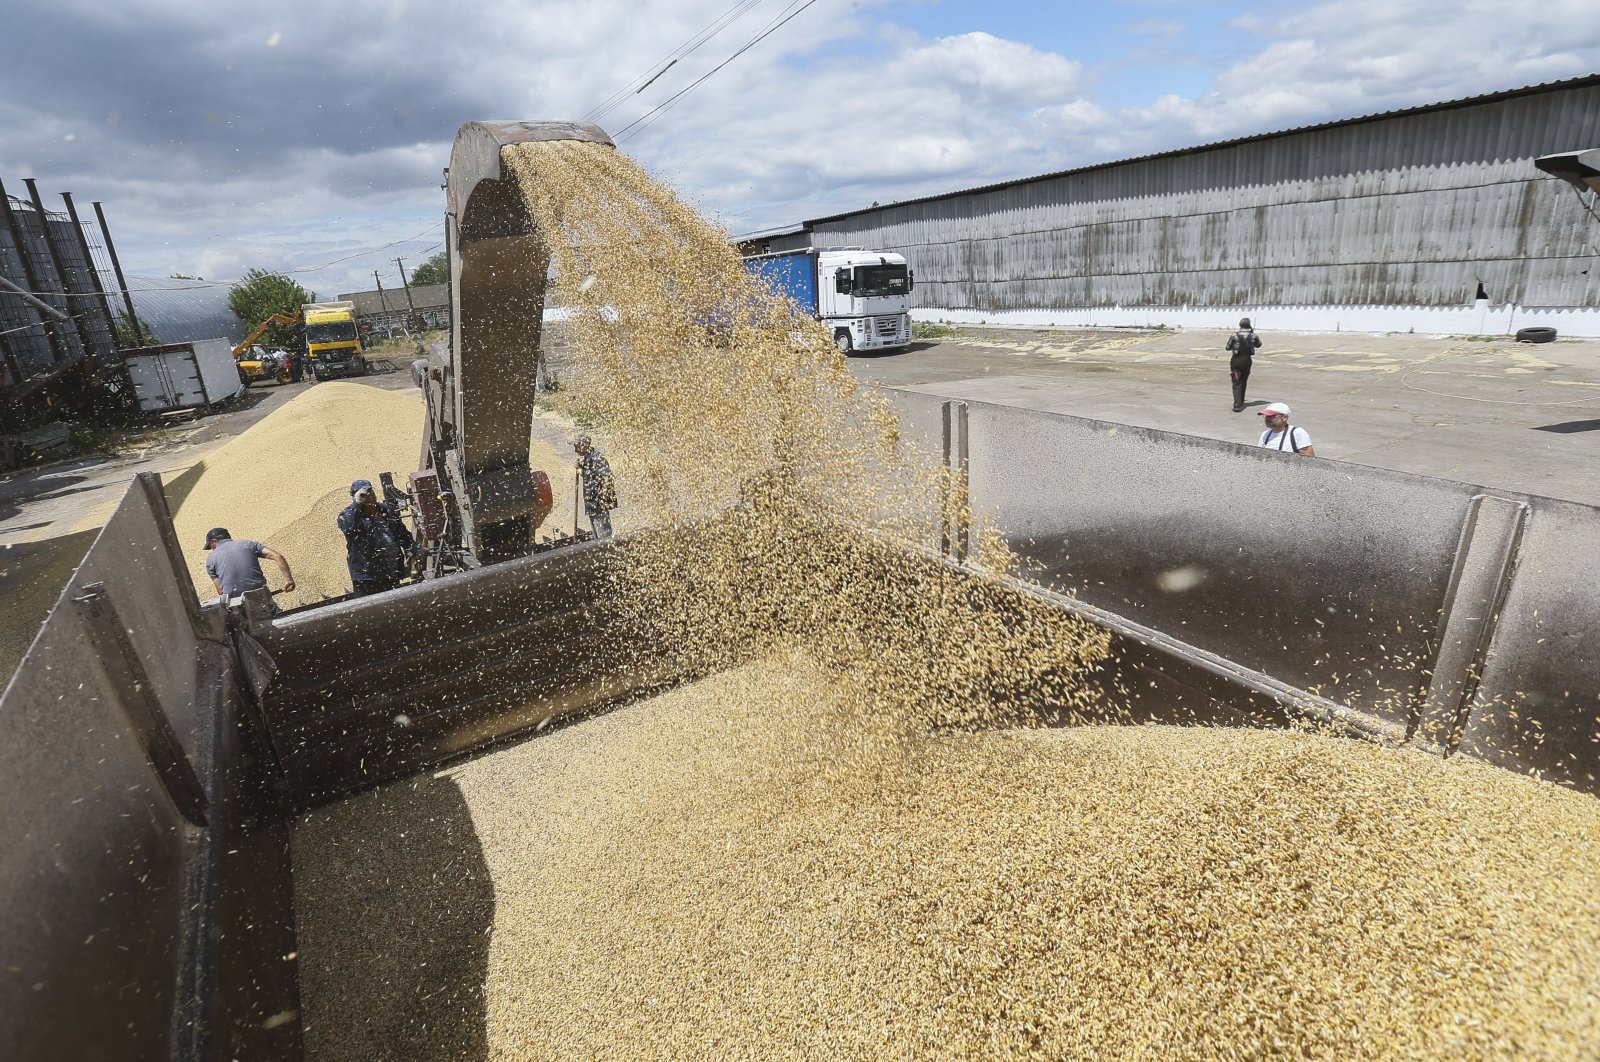 Workers load a truck with grain at a terminal during barley harvesting in the Odessa region, southern Ukraine, June 23, 2022. (EPA Photo)